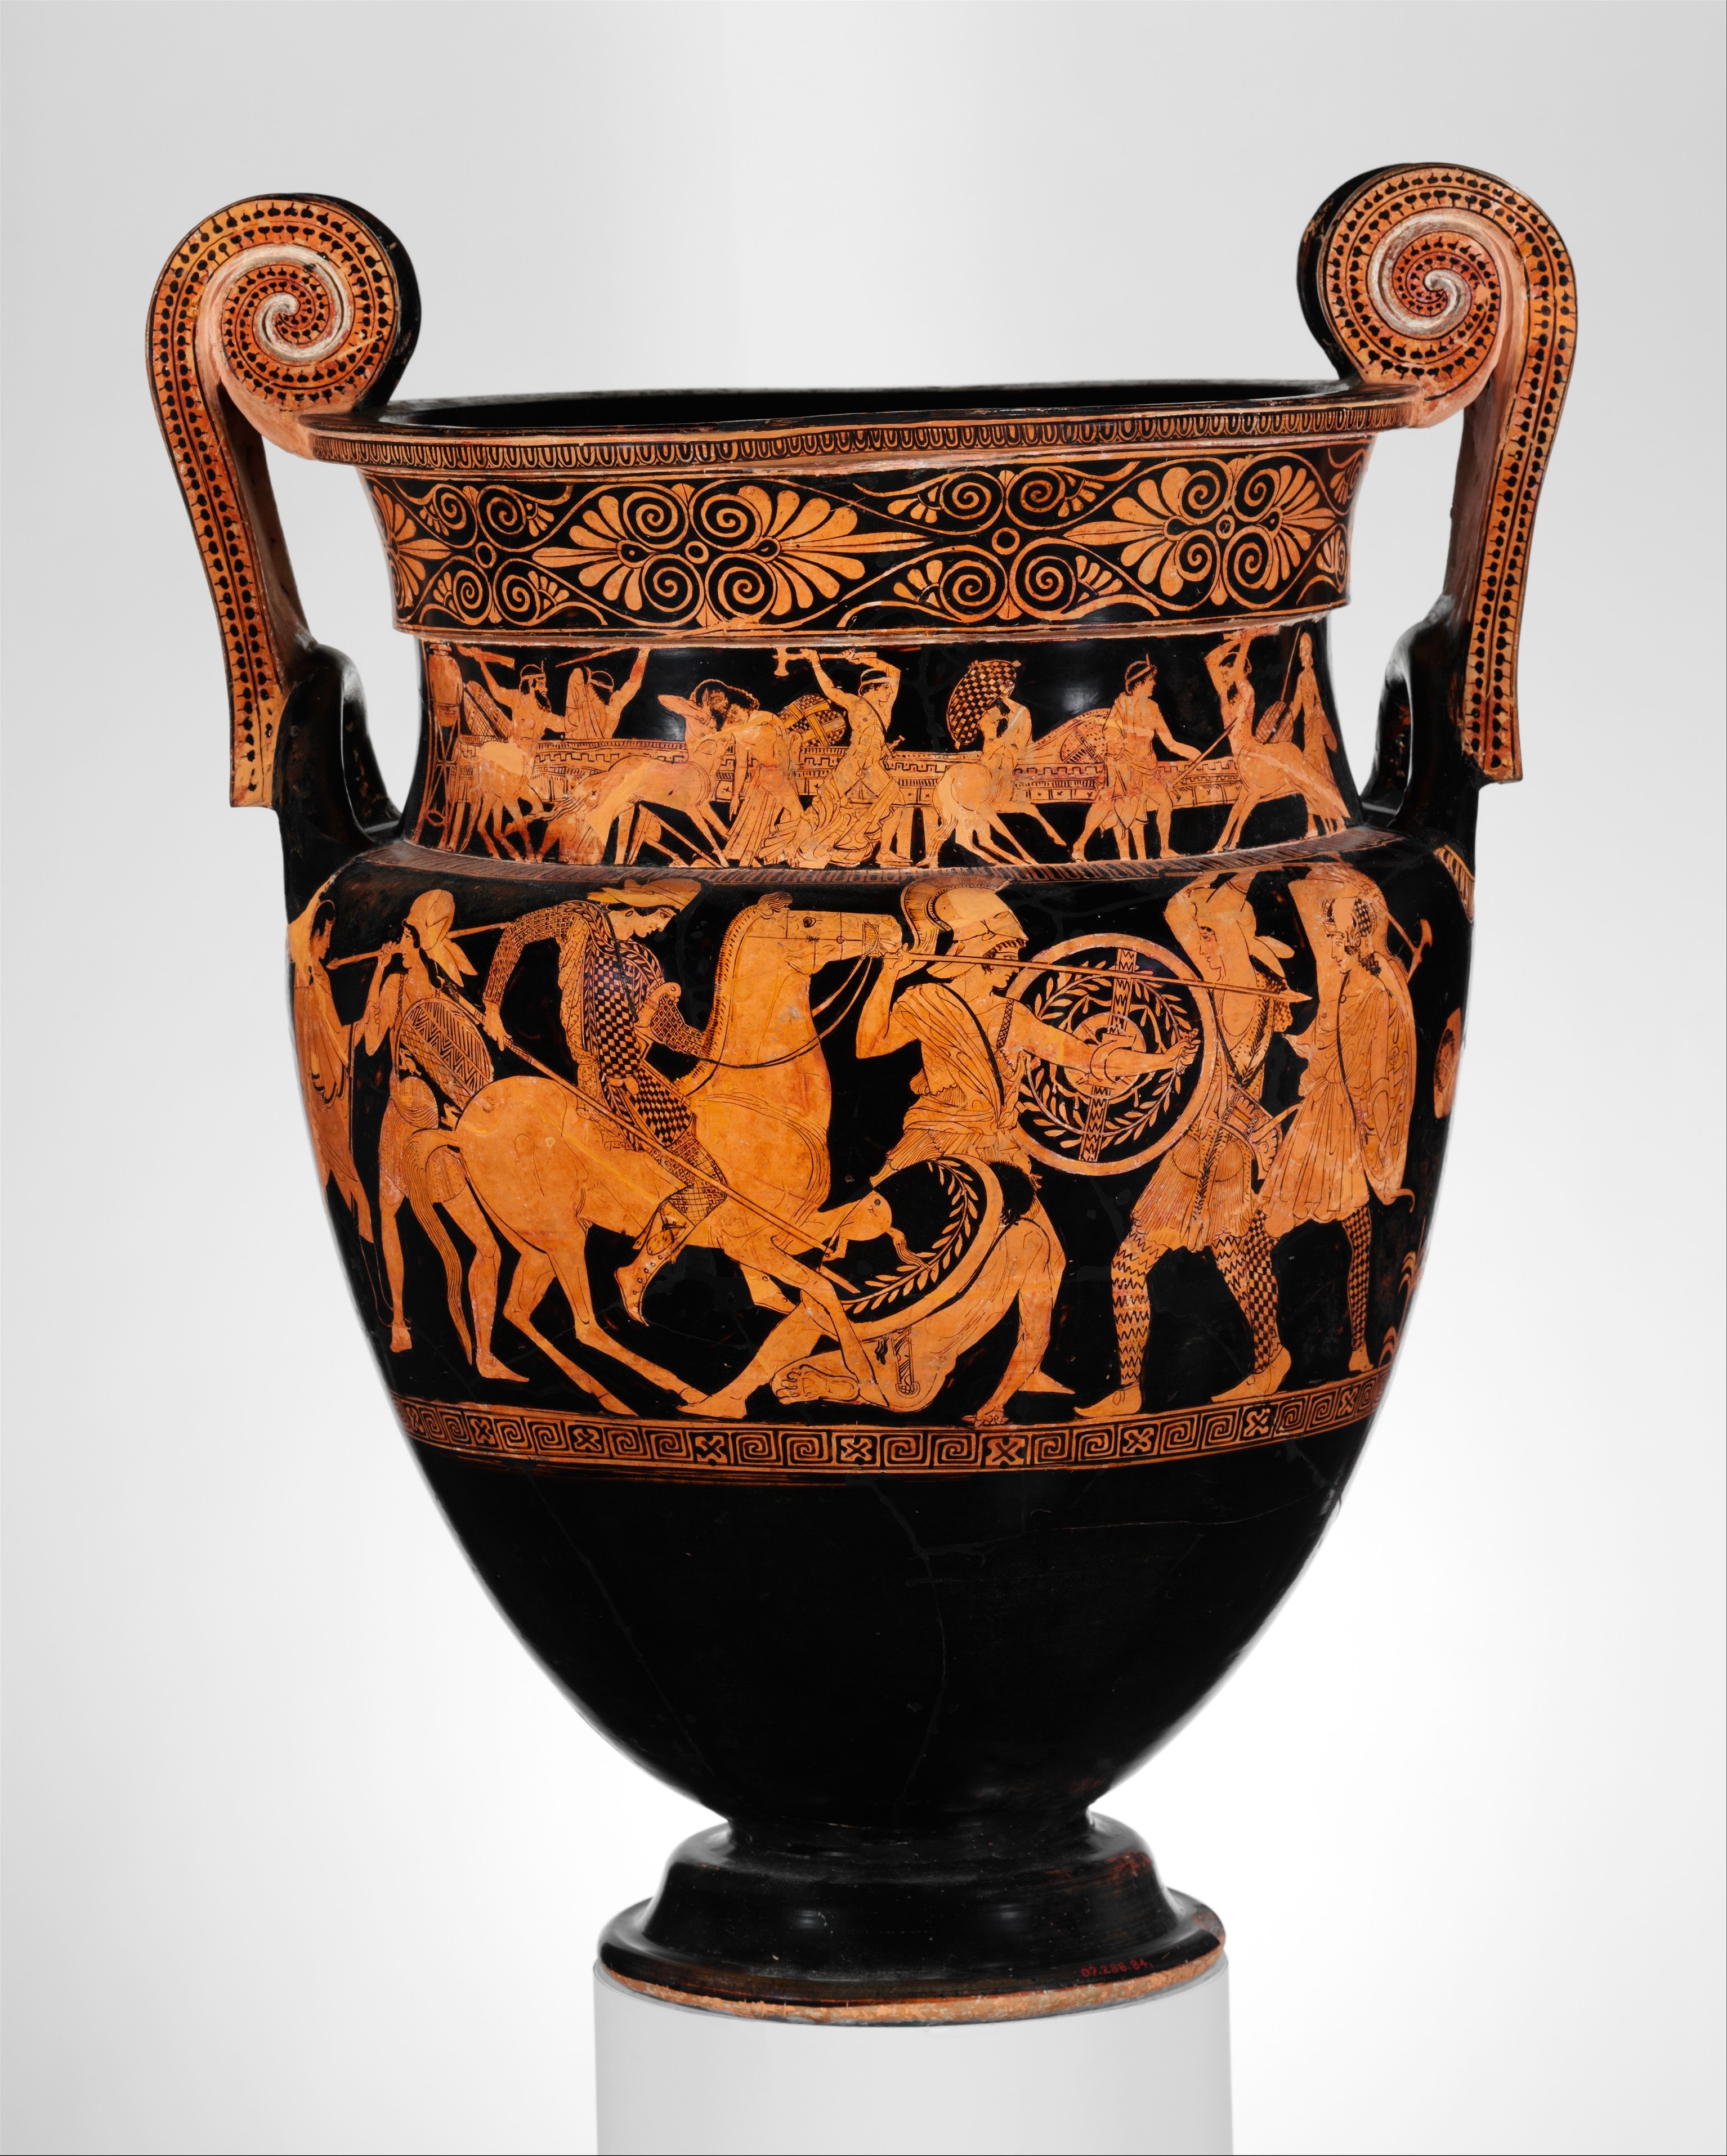 Greeks and Amazons fights. One of the Amazons rides a horse. The Amazons are distinguished with tiger-stripe patterns on their limbs, while the Greeks have helms and shields.